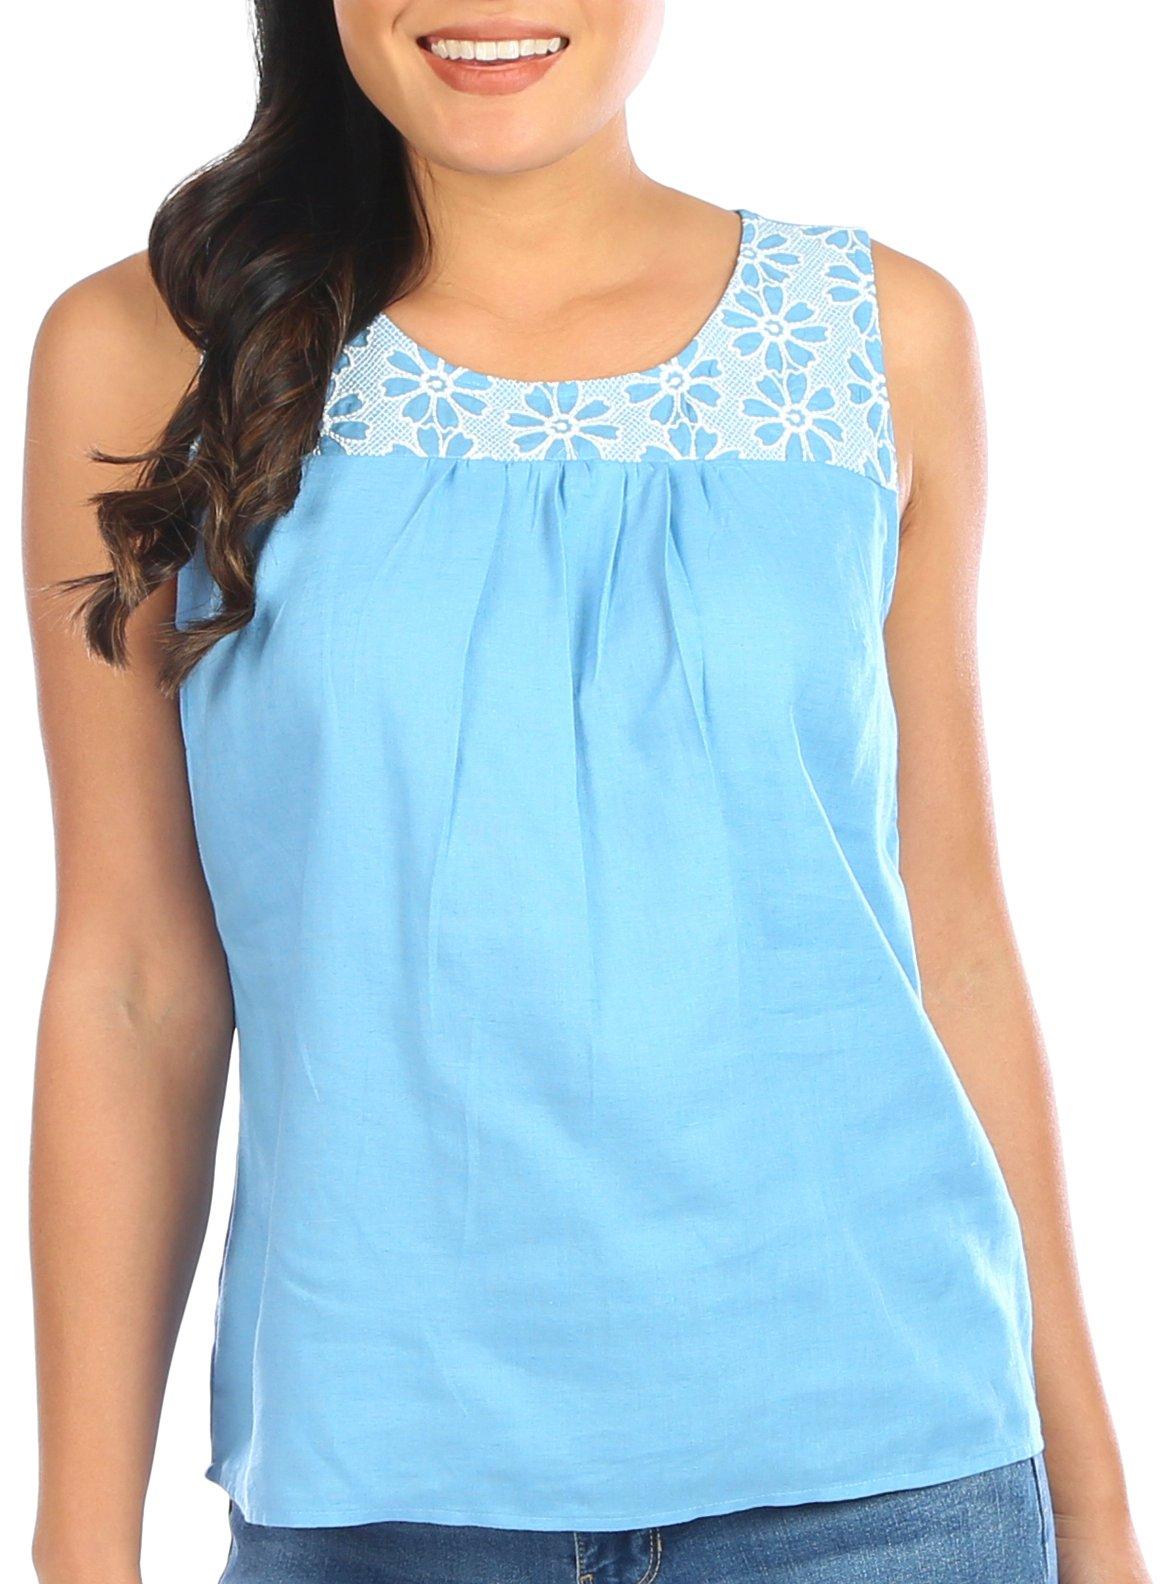 Womens Embellished Lace Sleeveless Top